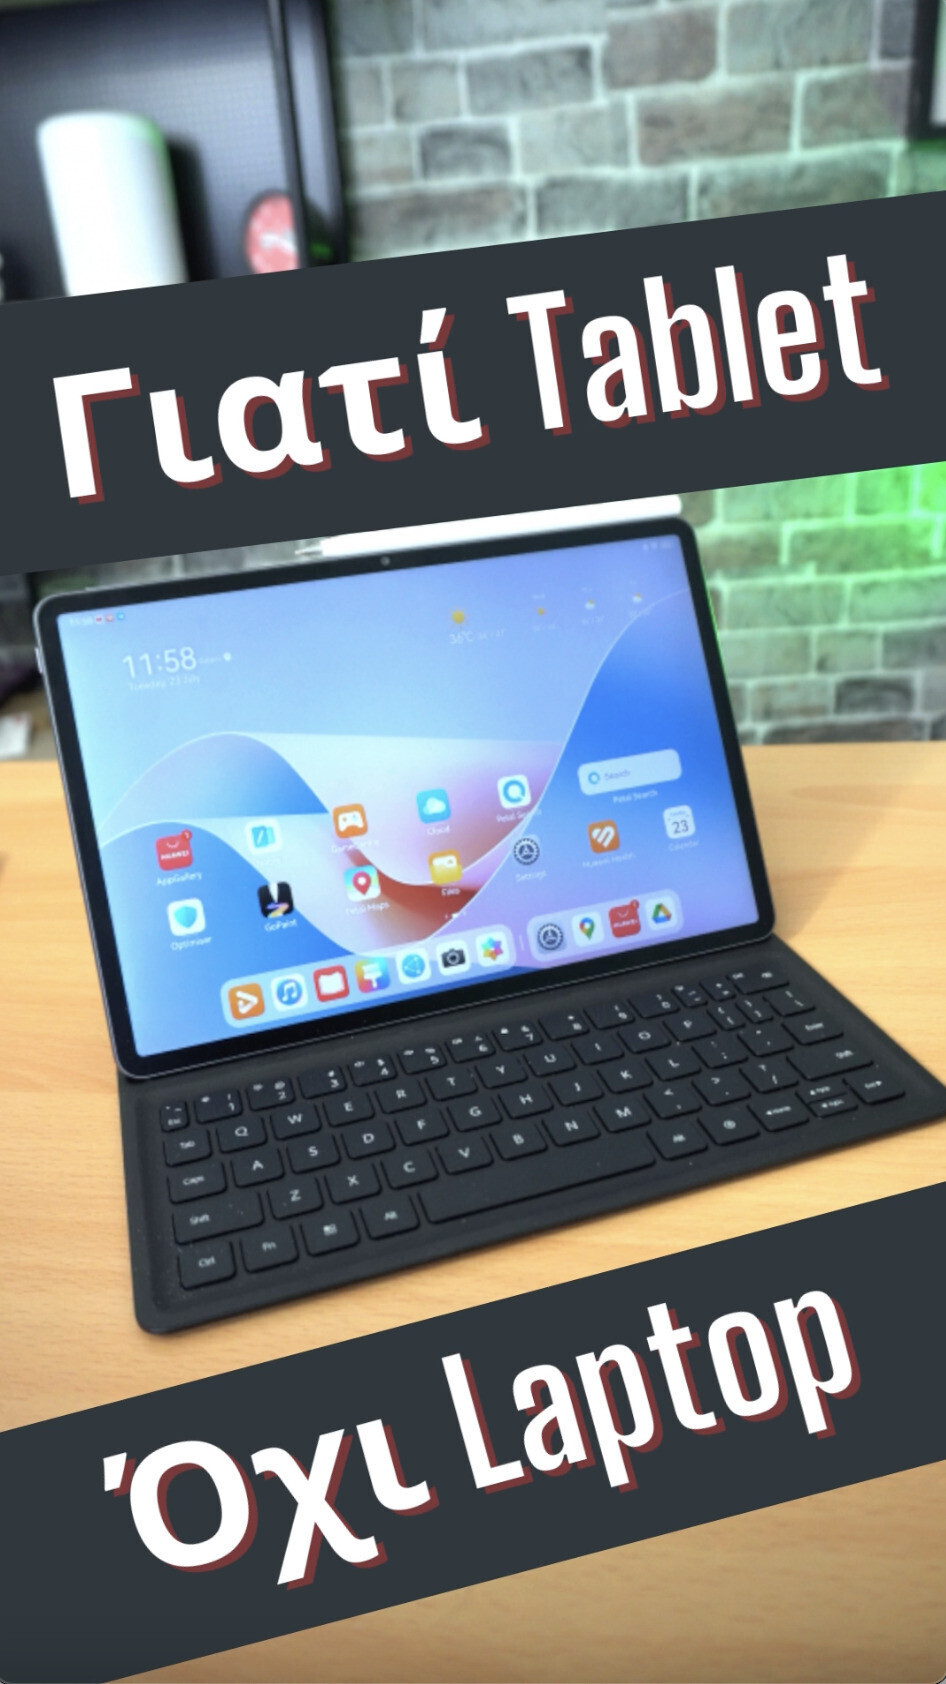 Tablet or laptop? Watch the video and learn what to choose!